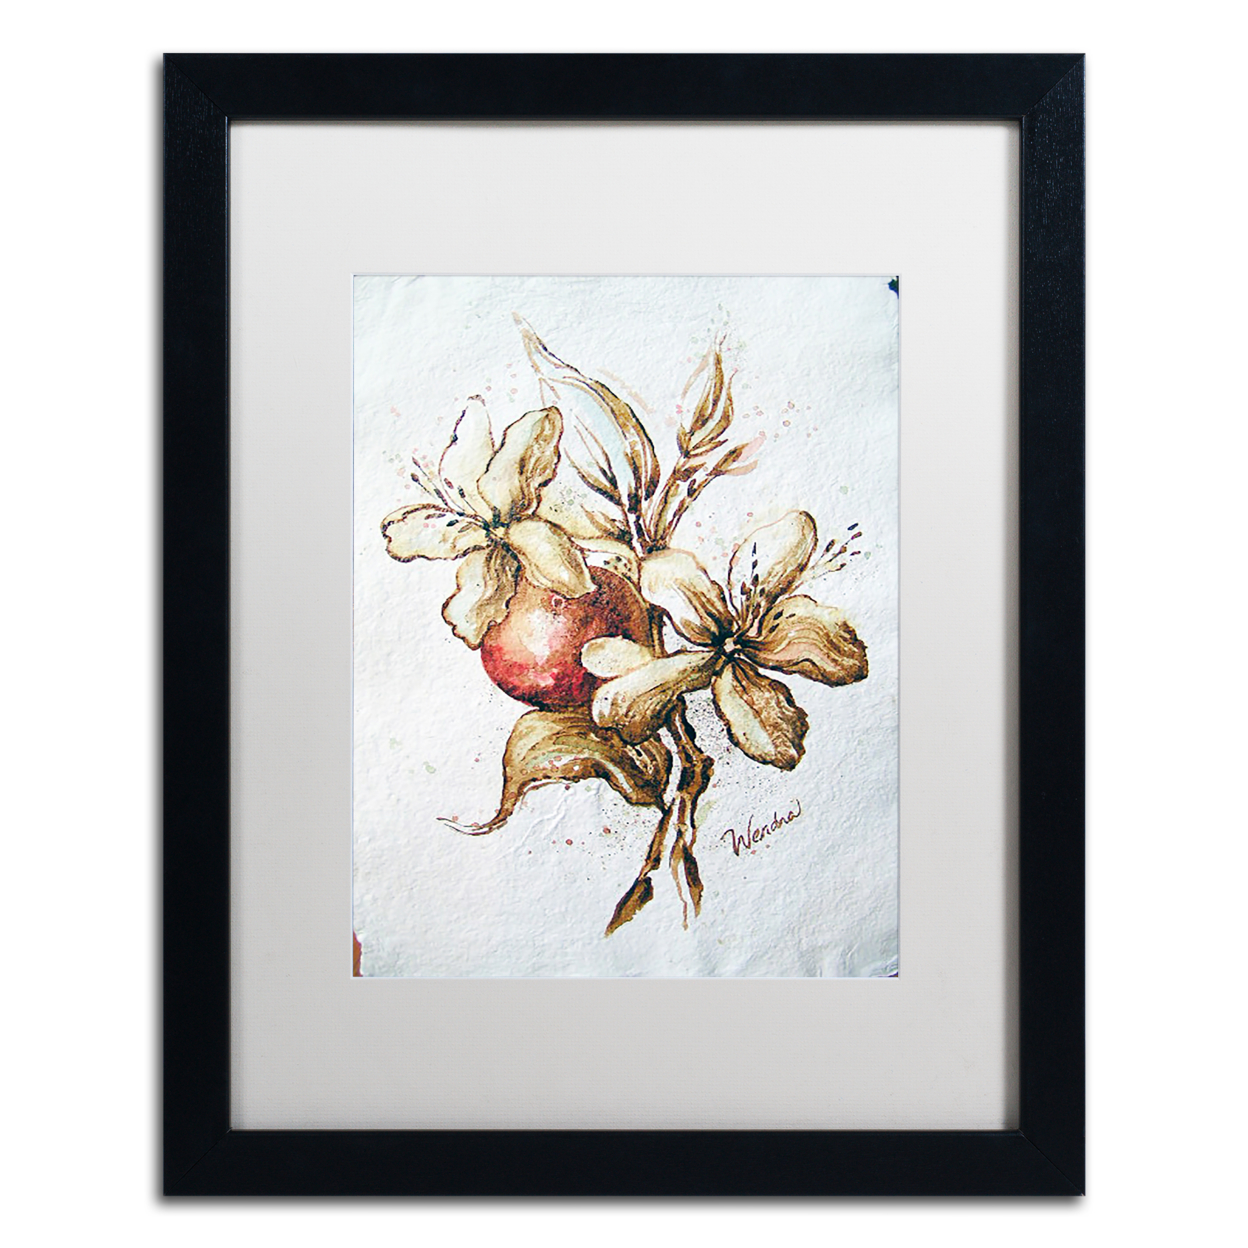 Wendra 'Coffee Flower And Bean' Black Wooden Framed Art 18 X 22 Inches